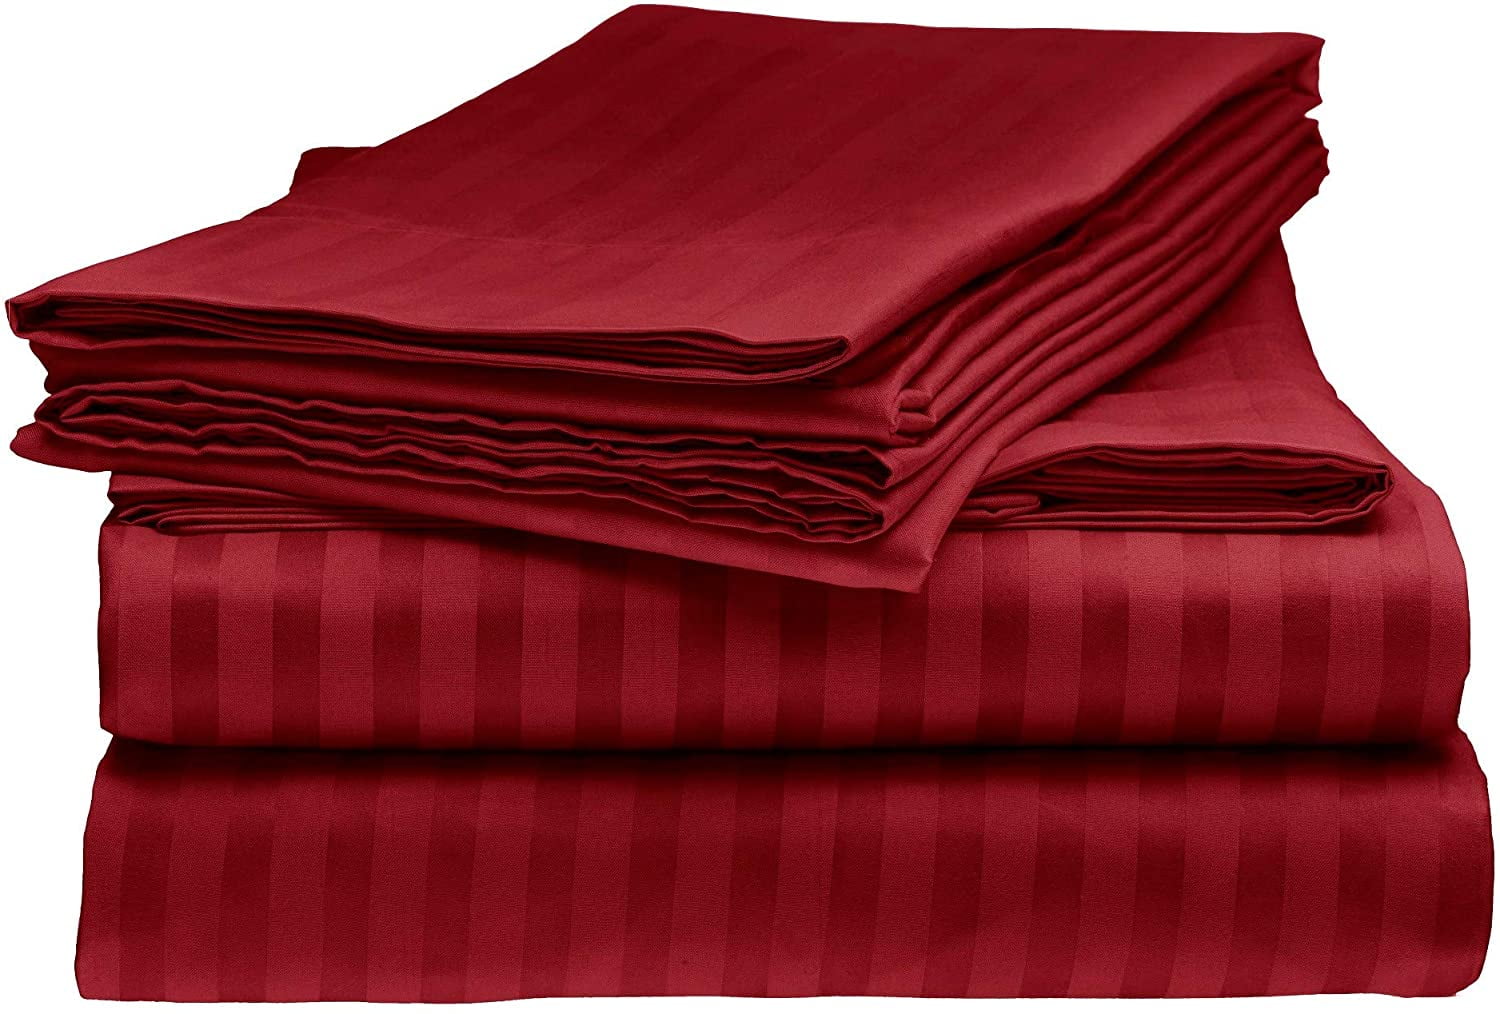 4 PCs Sheet Set 1000 Count Egyptian Cotton Solid Colors Full,Queen,King Size 